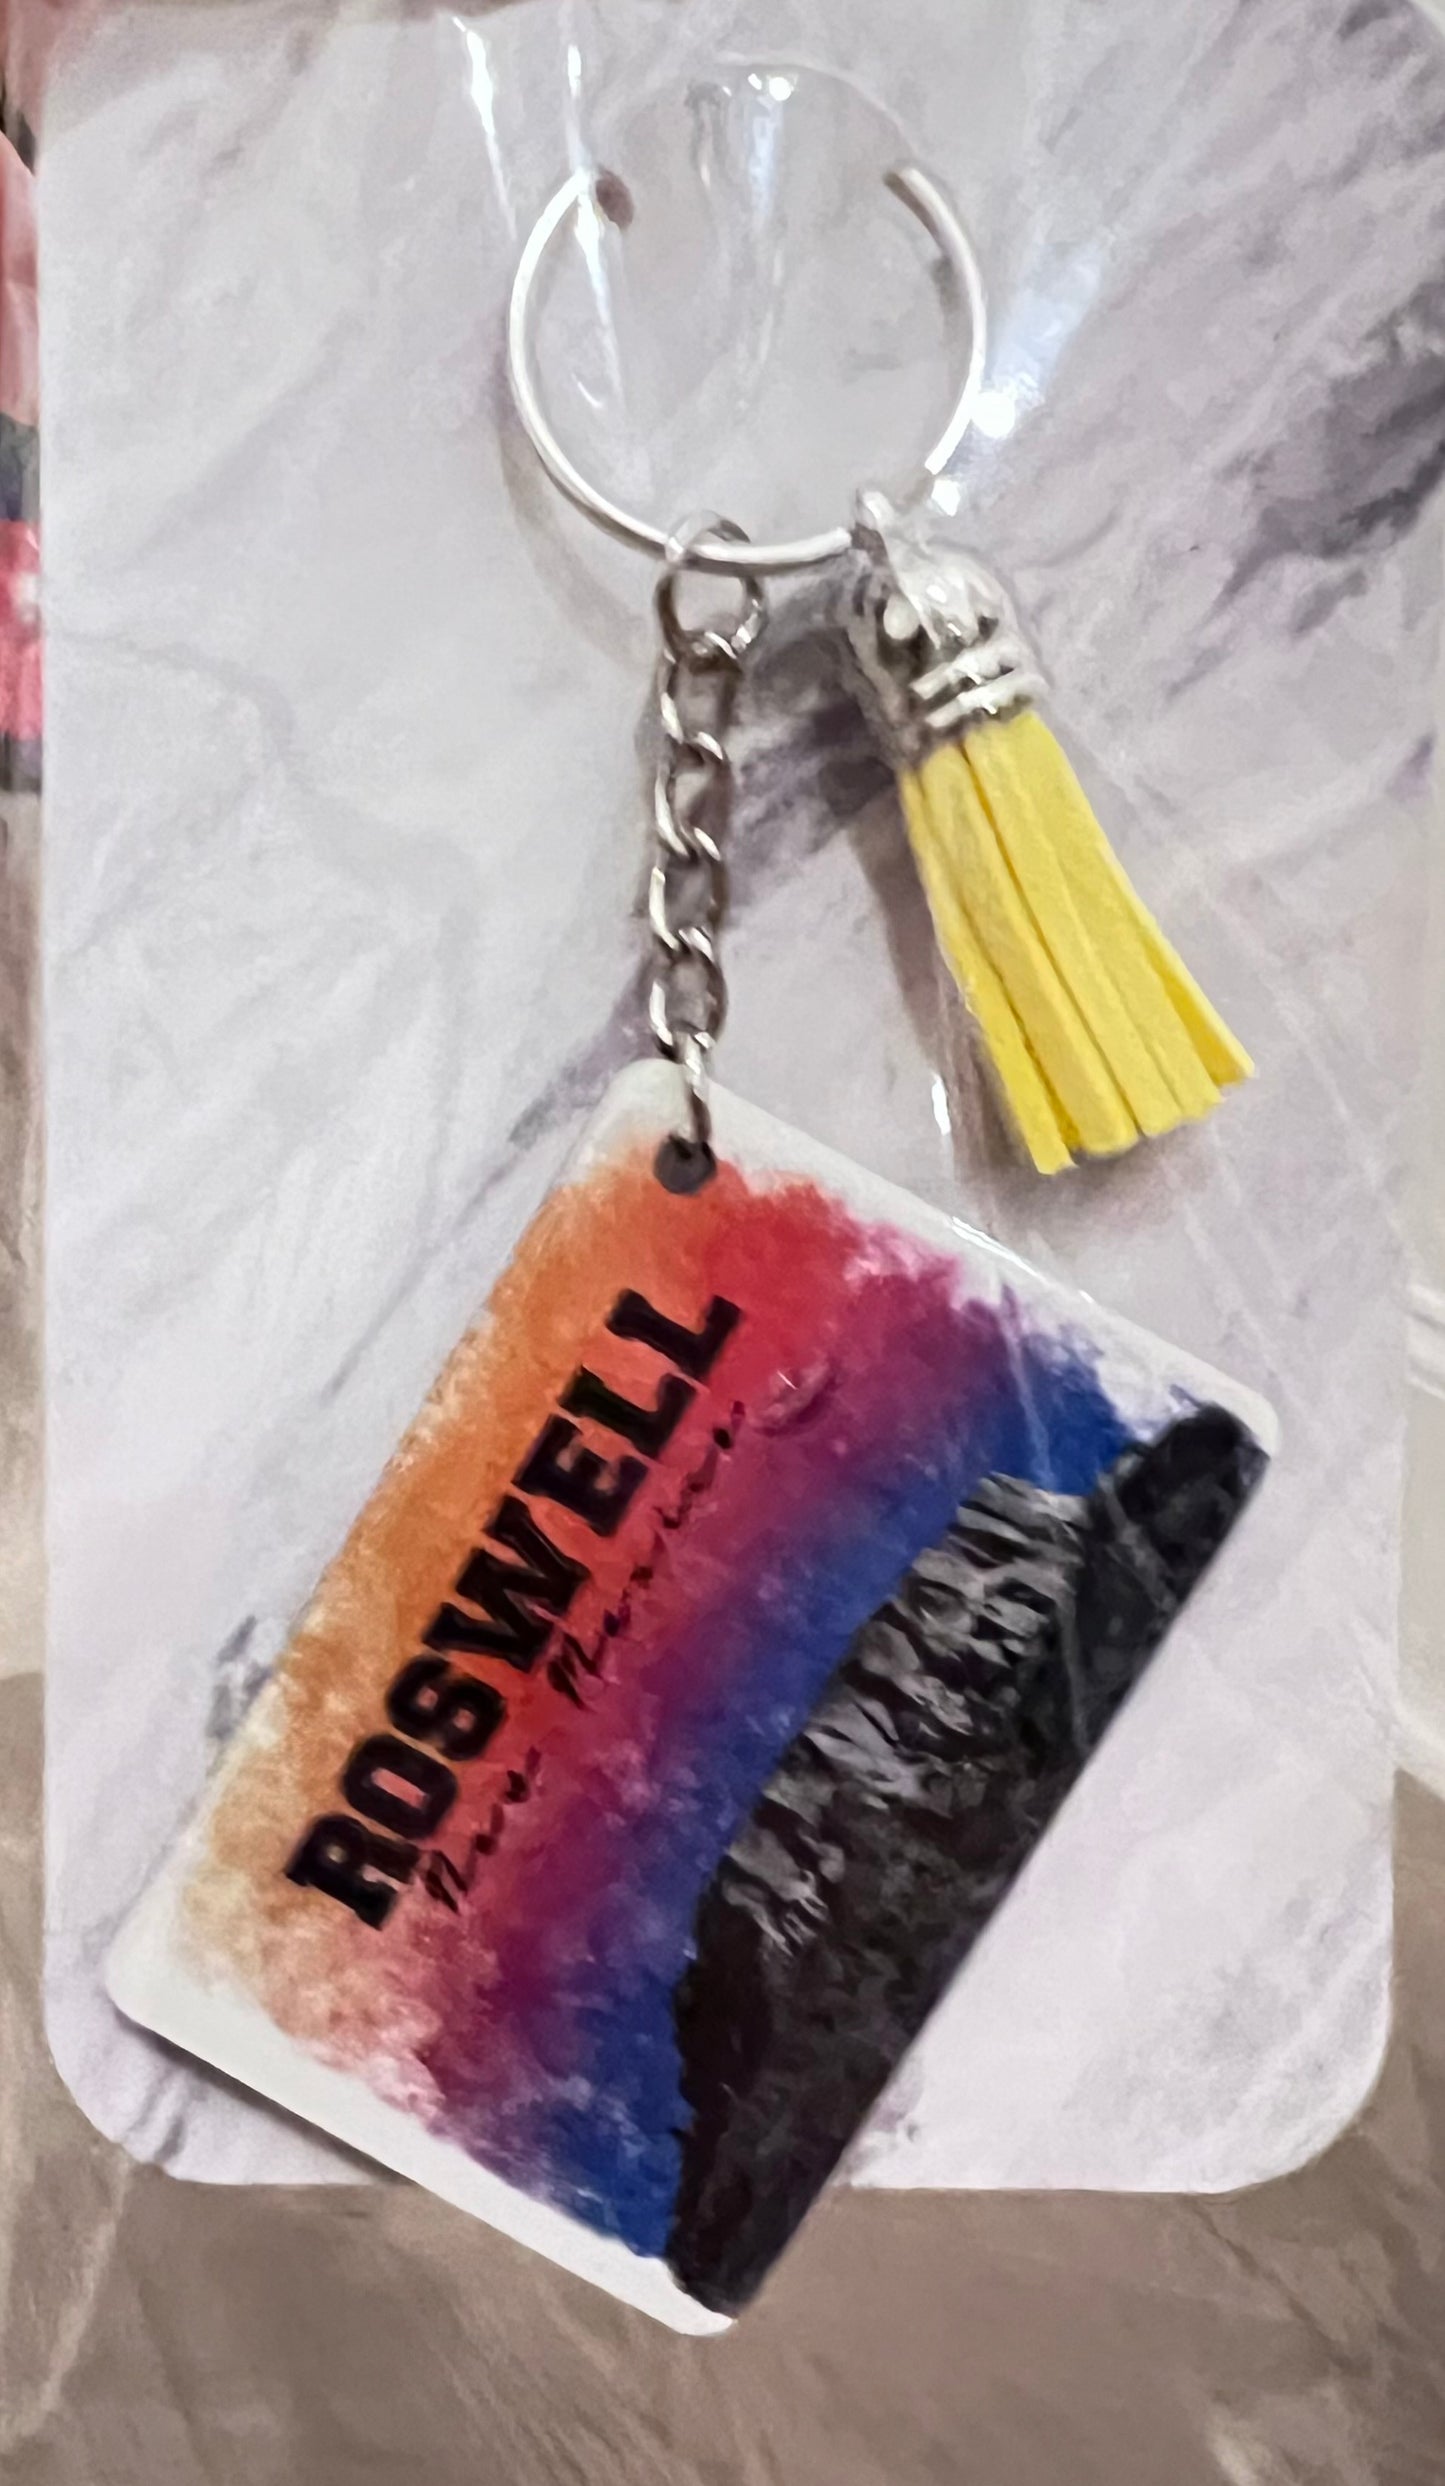 Roswell New Mexico Sunset Keychain- Accessories